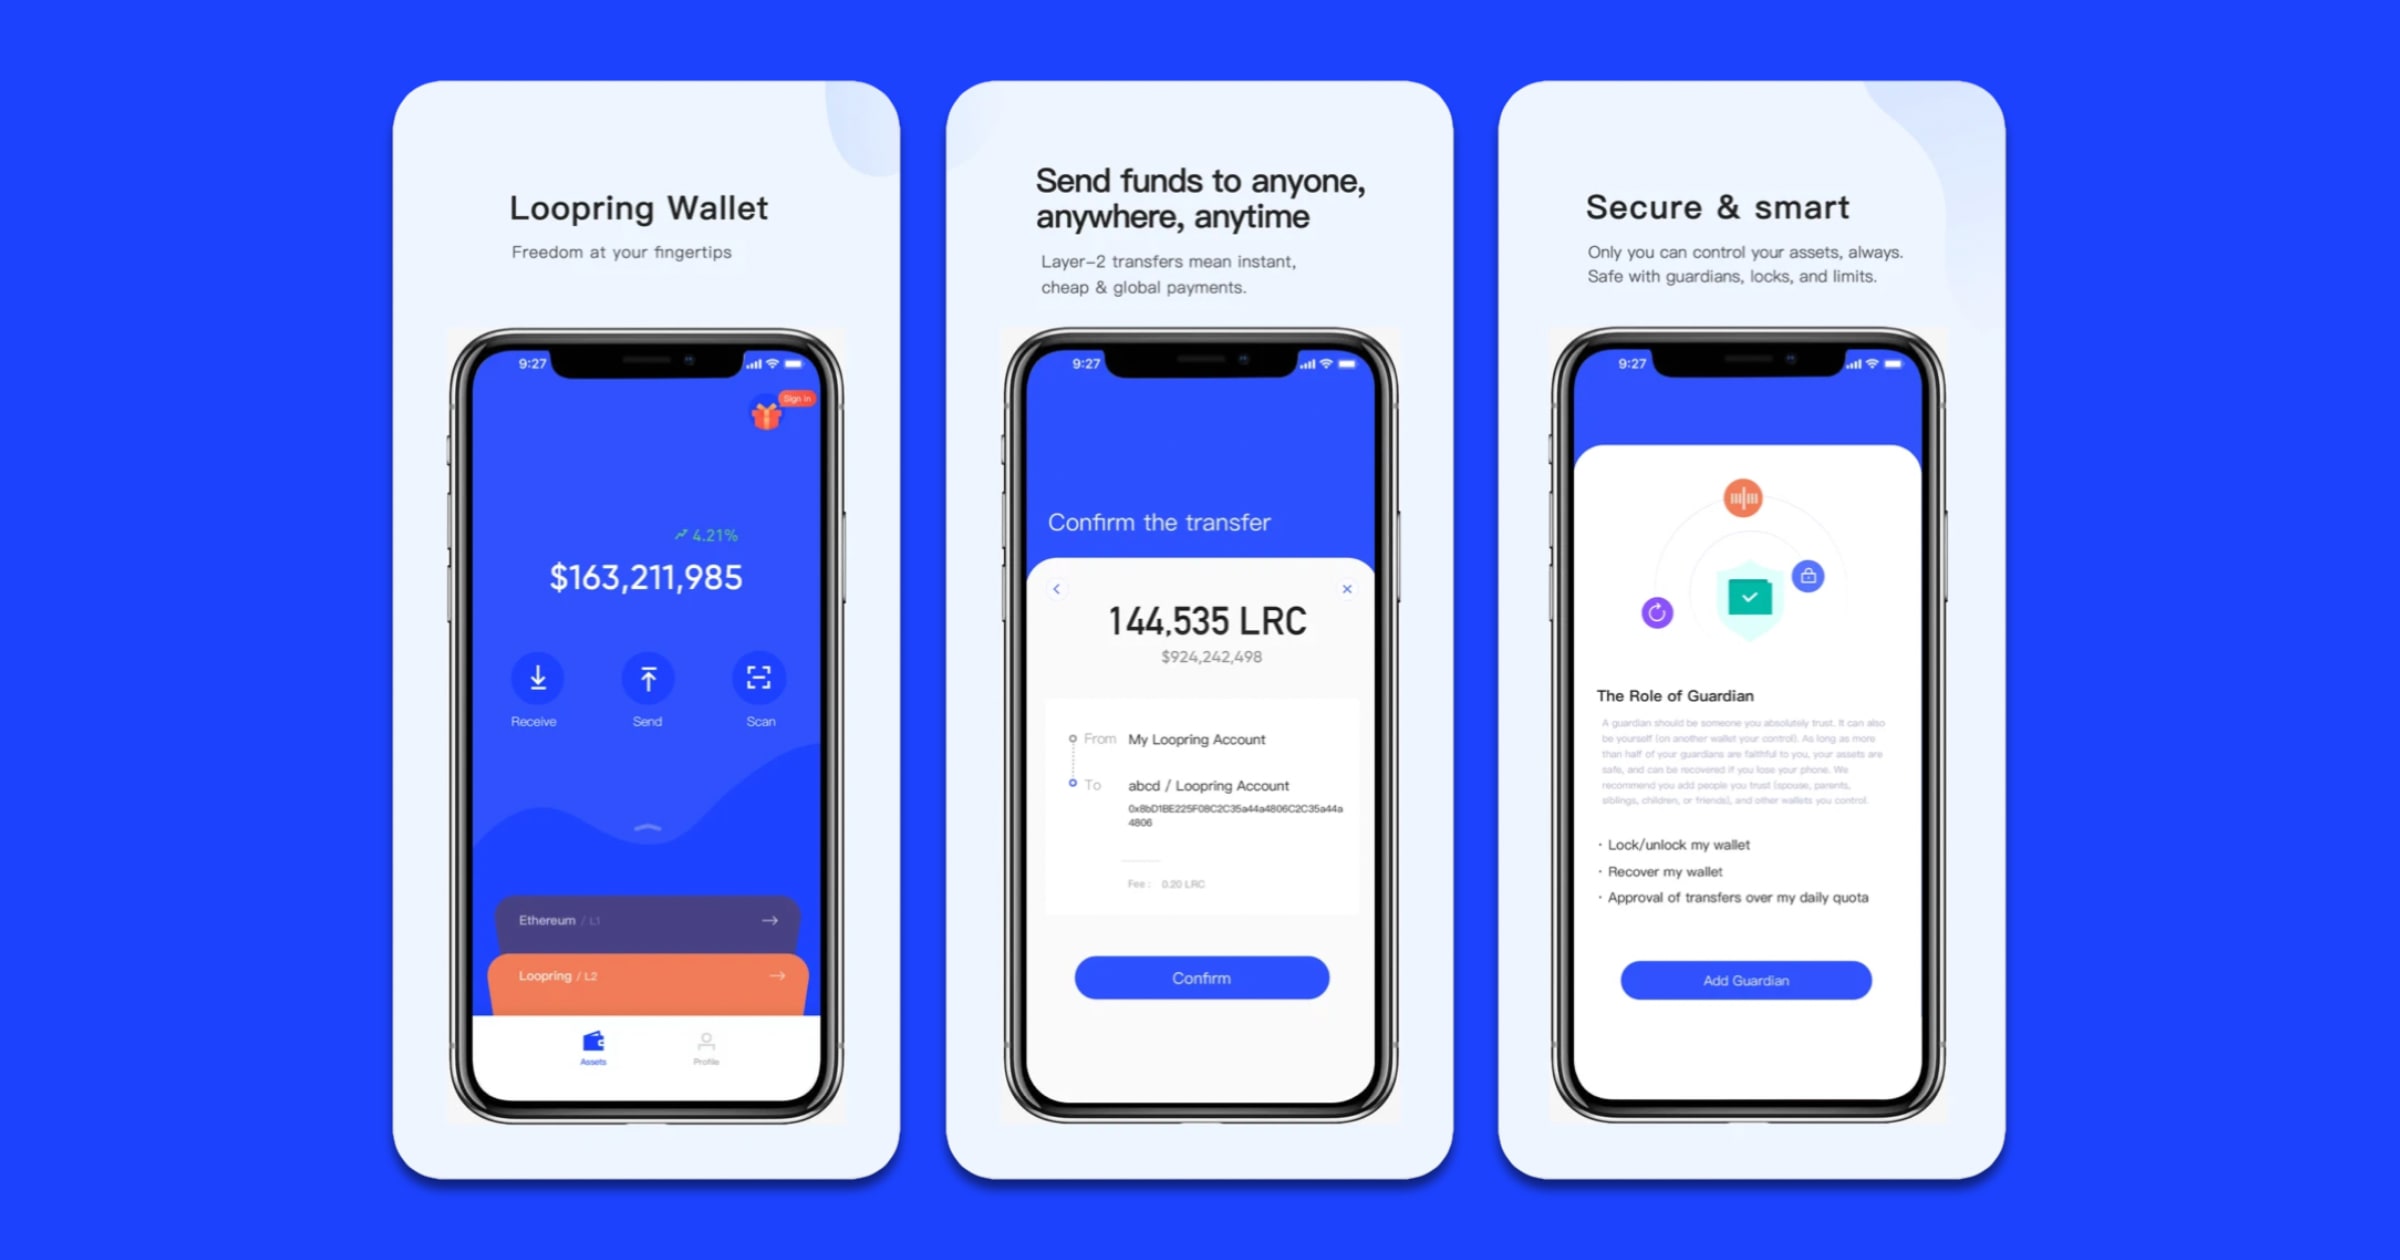 Loopring’s New Smart Wallet Can Help Recover Stolen or Lost Crypto